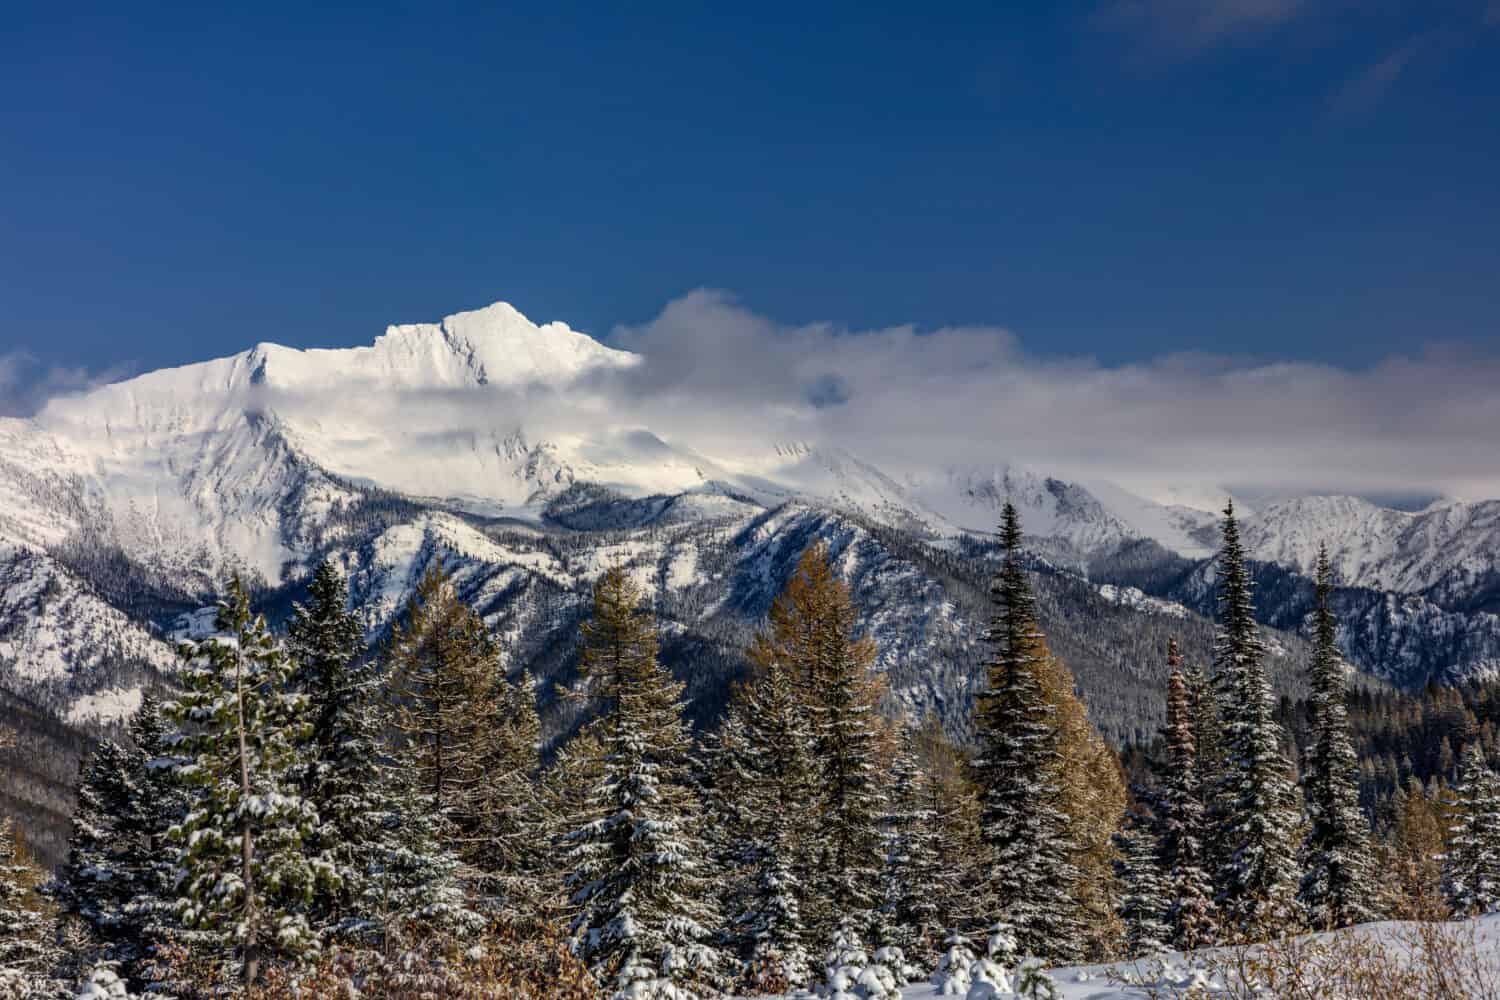 Great Northern Mountain with fall snowfall in the Flathead National Forest, Montana, USA